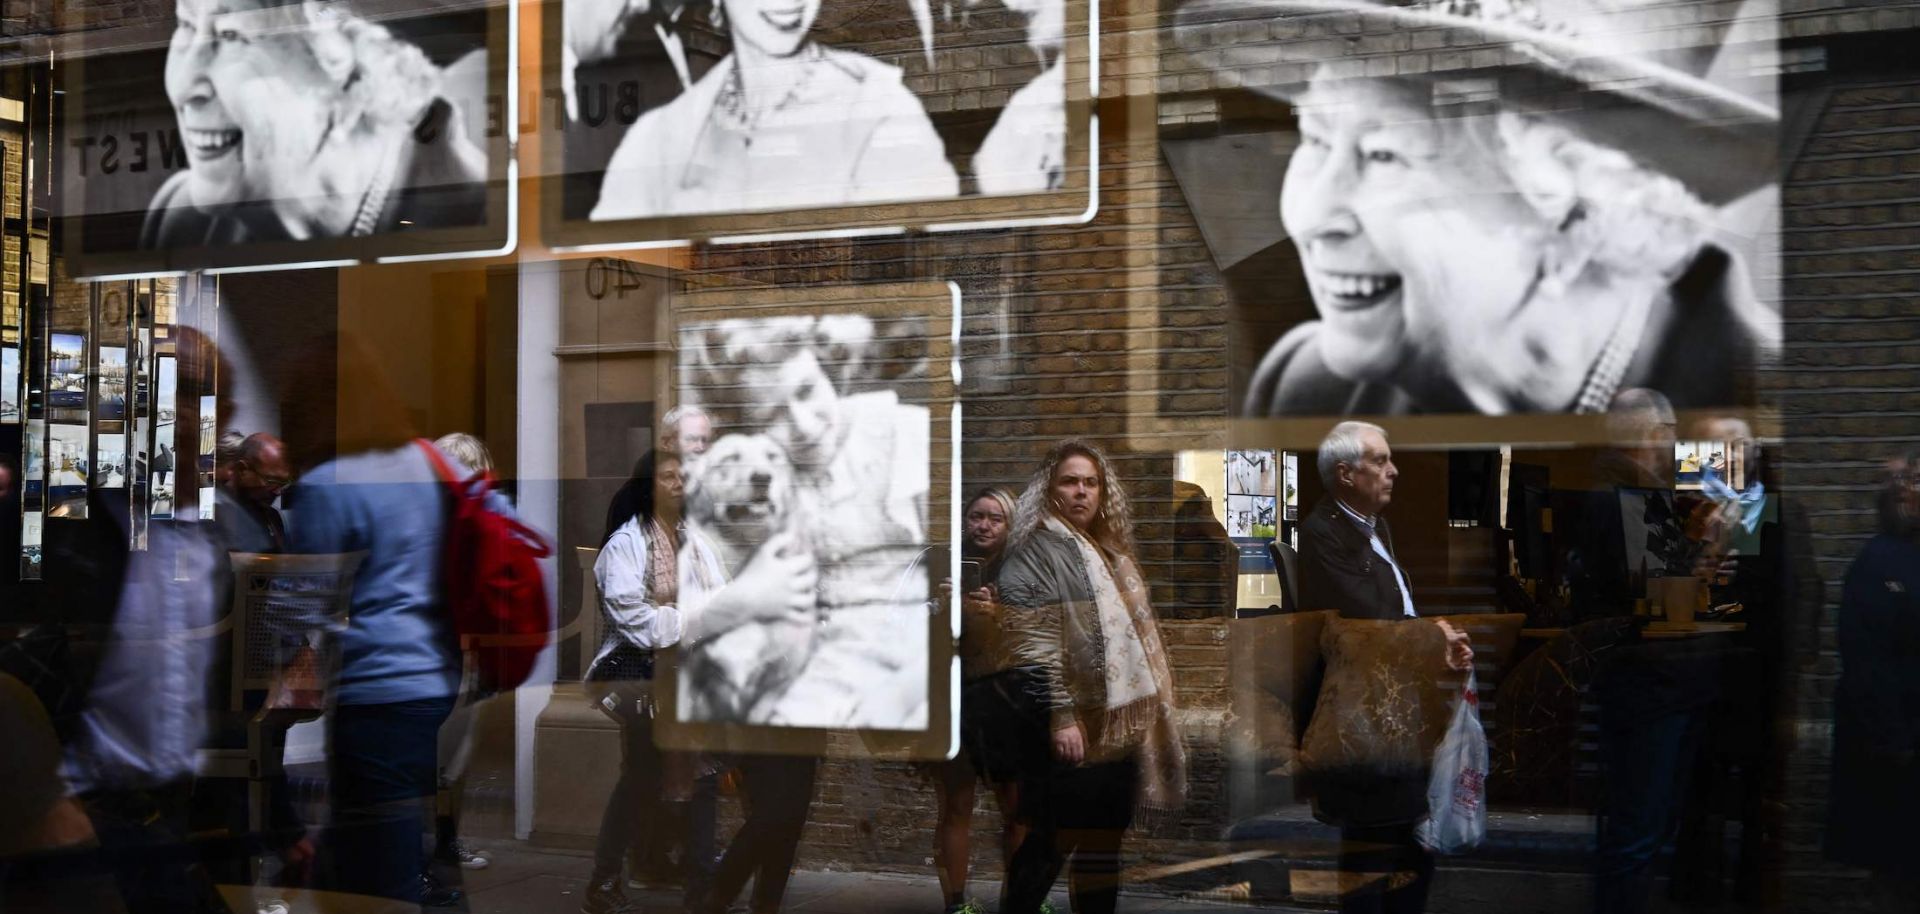 Pictures of Britain's Queen Elizabeth II in a window as members of the public wait in line to pay their respects to the late monarch Sept. 16, 2022, in London.